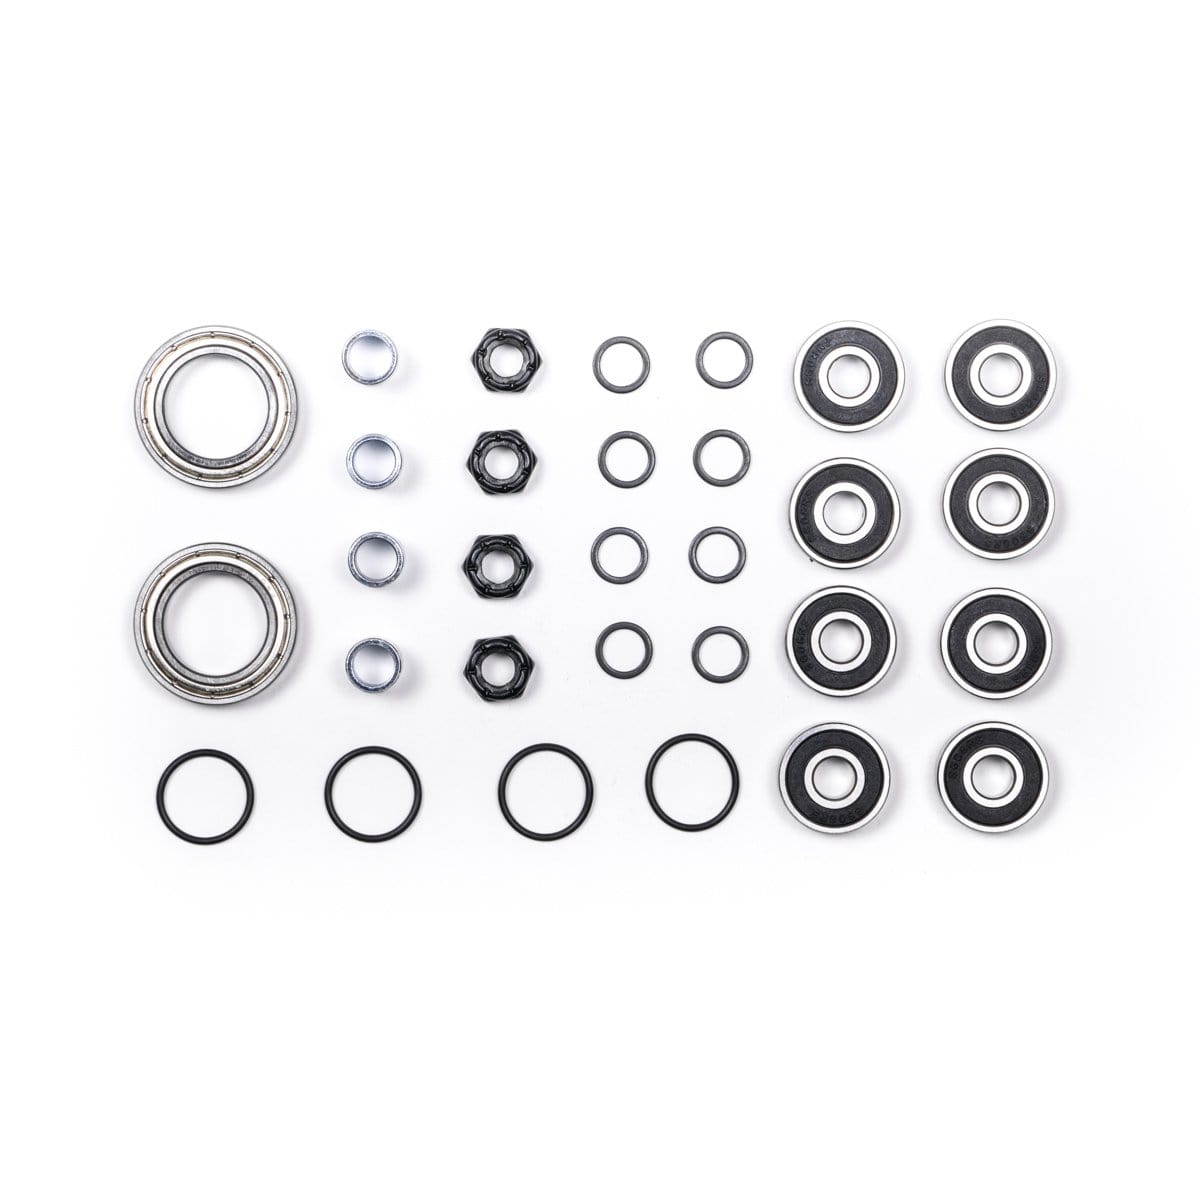 Boosted Bearing Service Kit